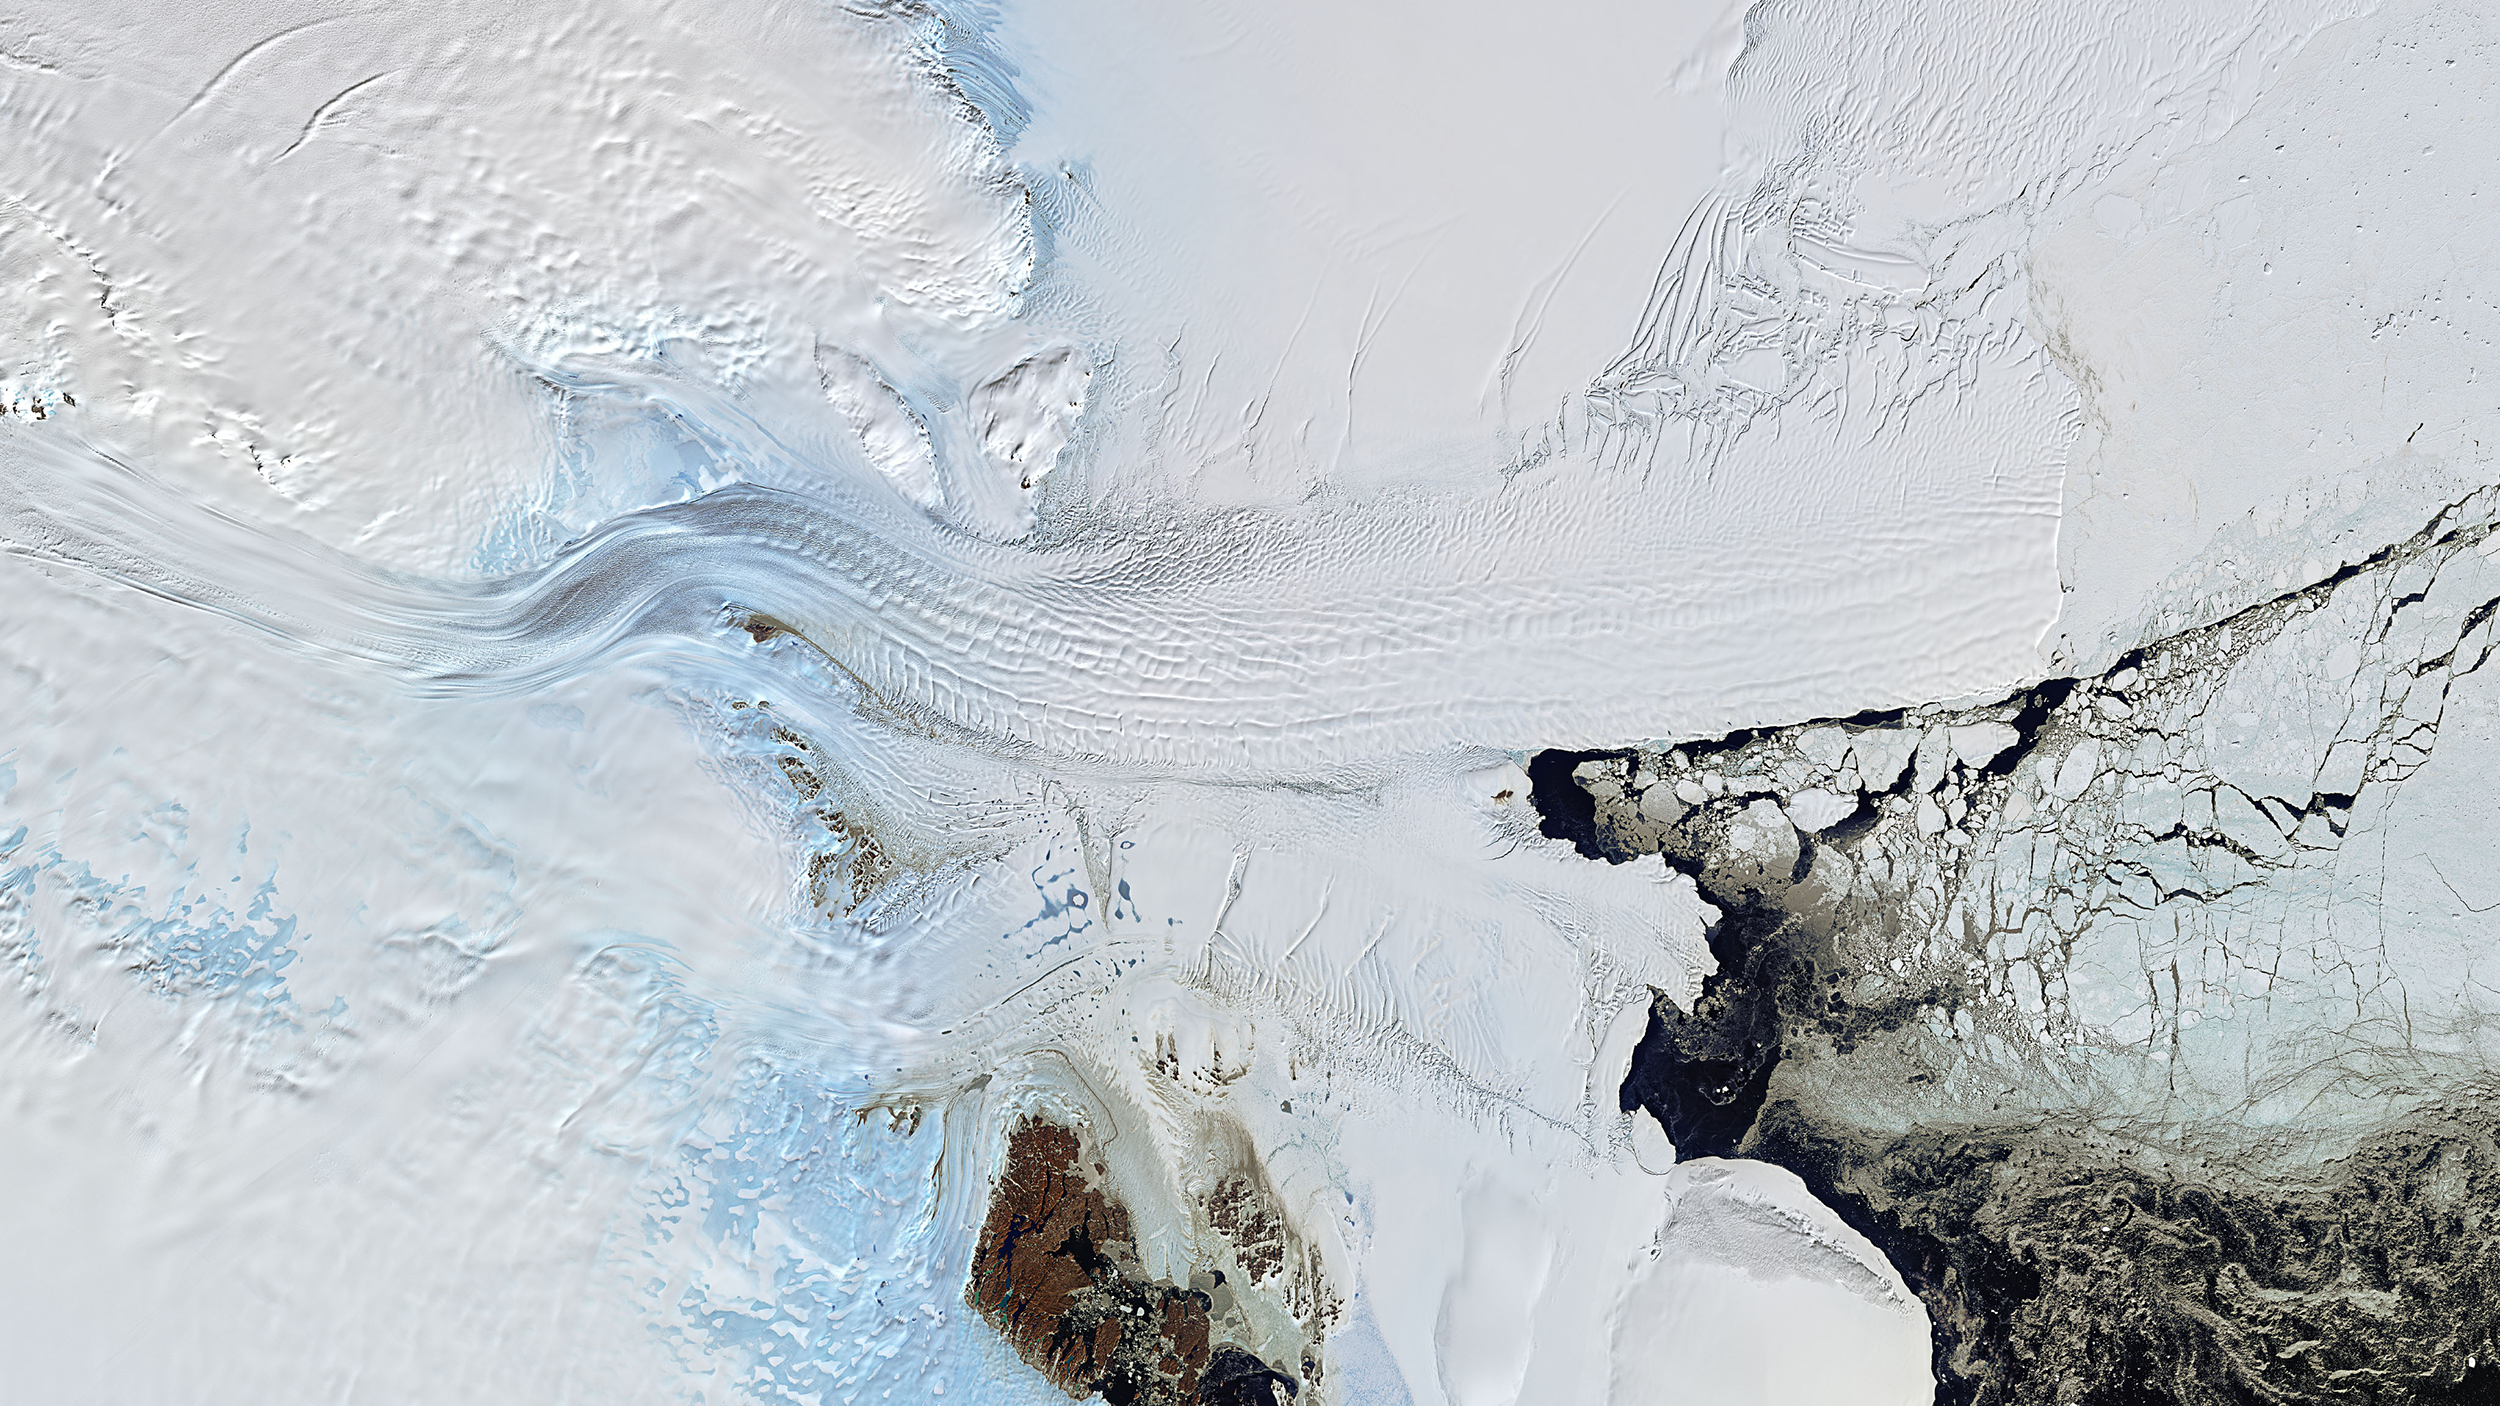 Denman Glacier flowing from left to right. From about the centre of the image the glacier is now fully afloat and known as the Shackleton Ice Shelf. The ice shelf is being melted from below by the ocean and icebergs break off from its front